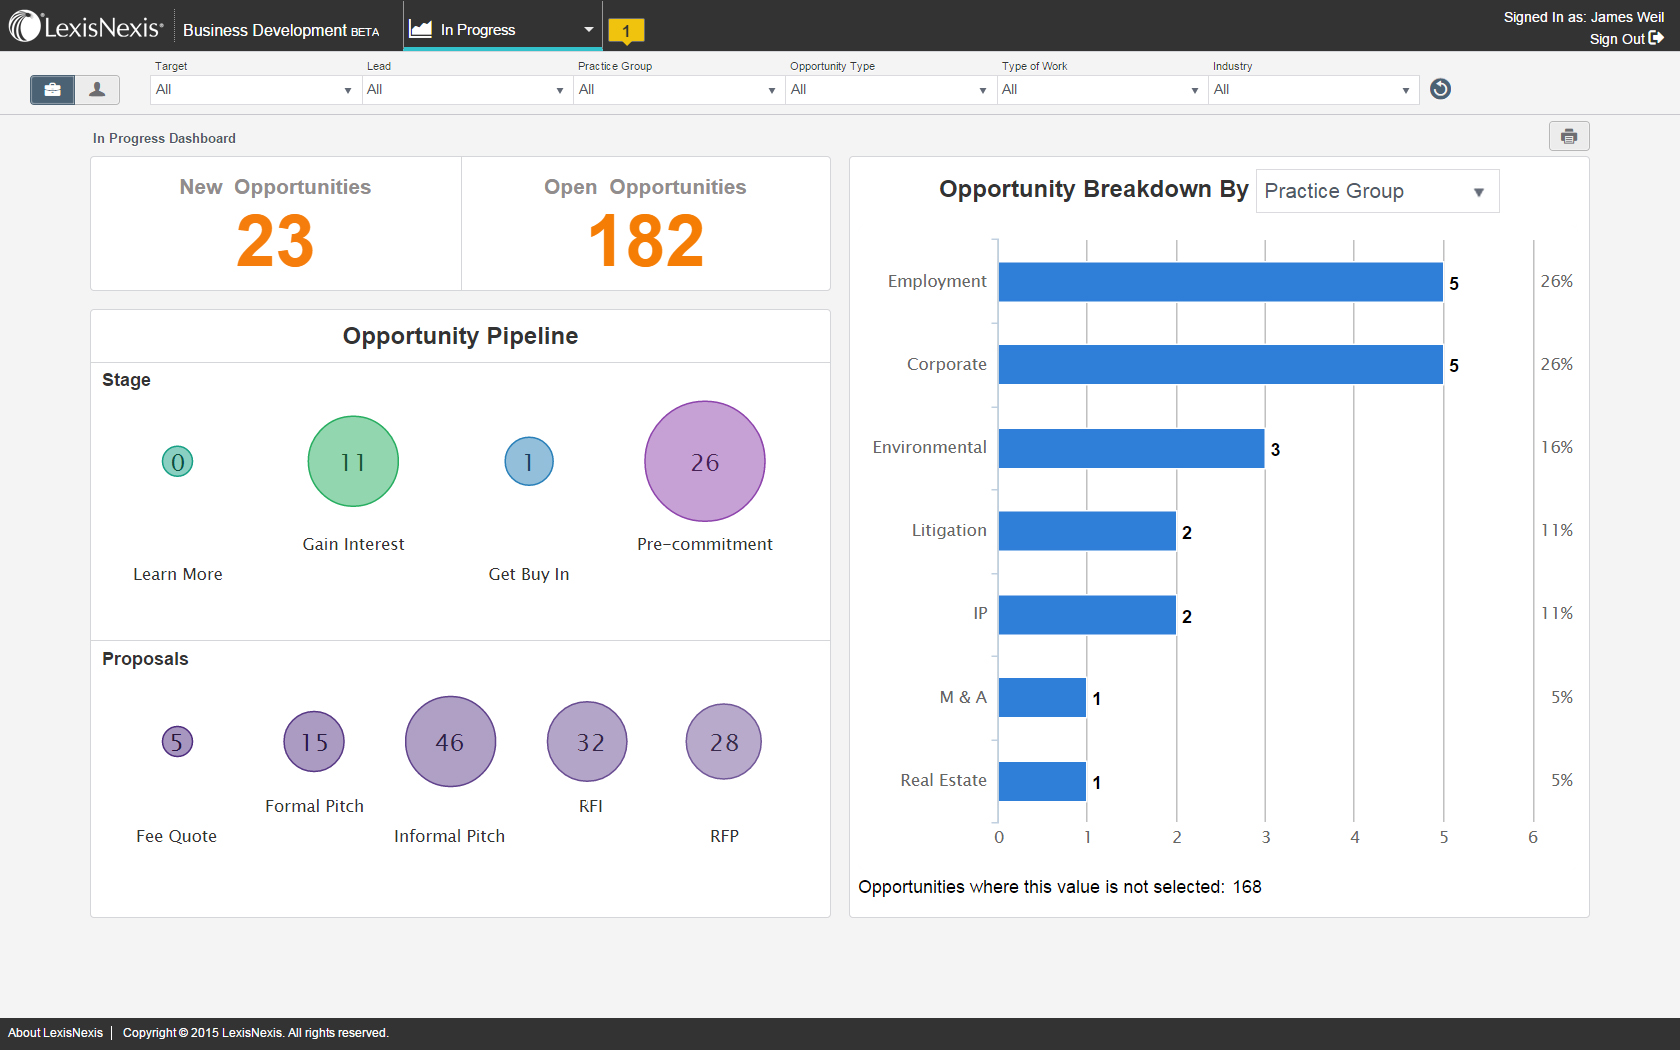 The opportunity dashboard provides an interactive at-a-glance view of law firm business development opportunities.